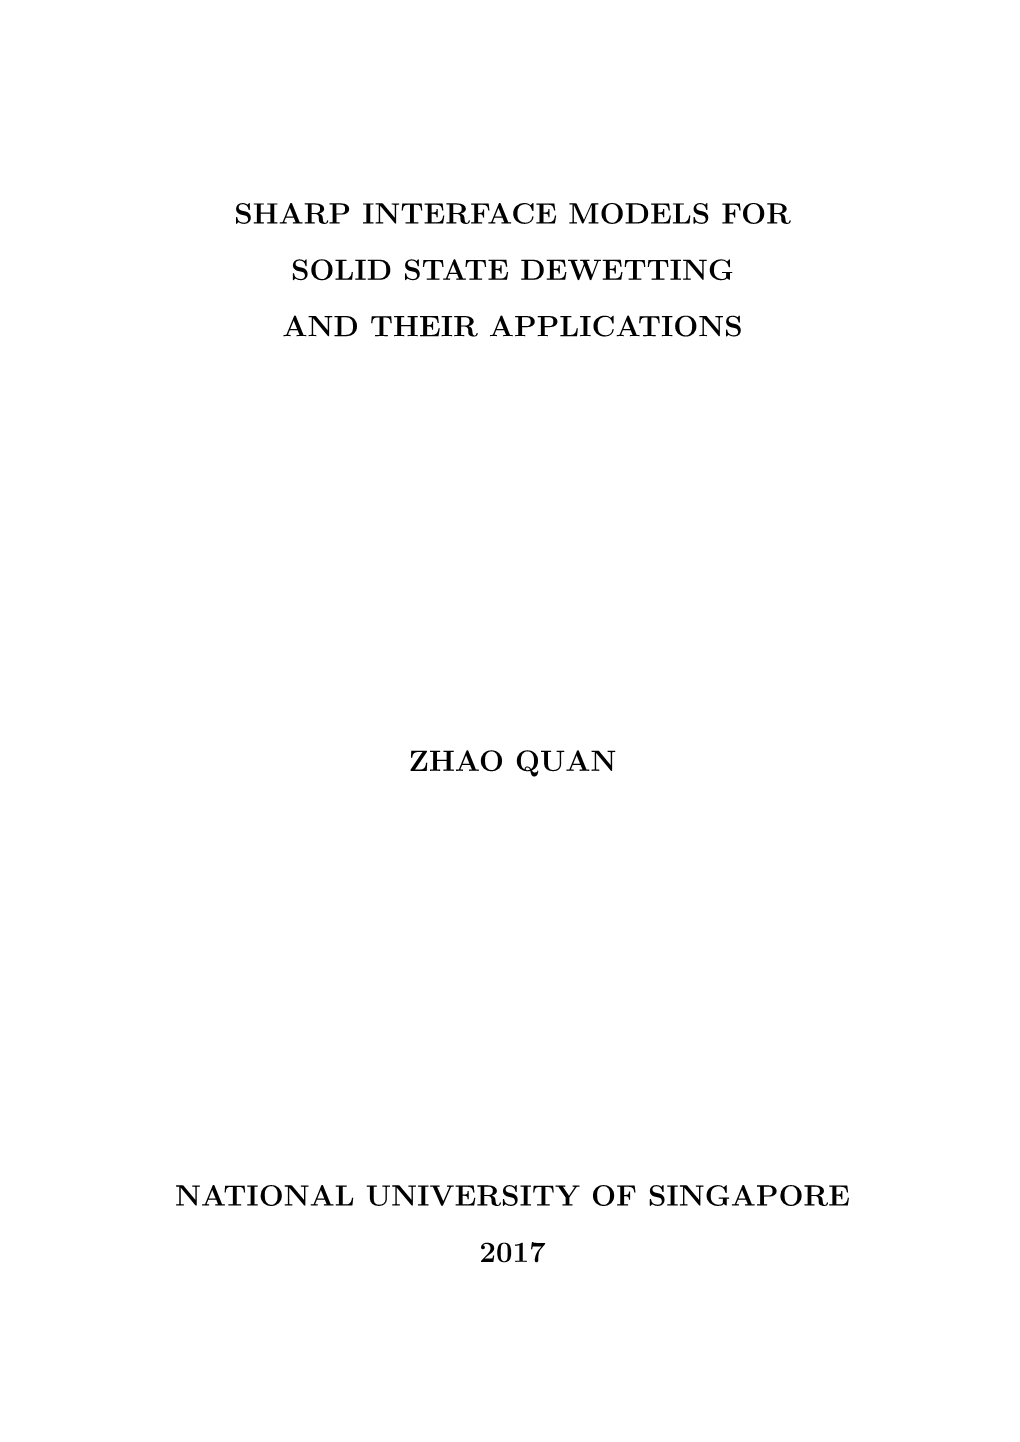 Sharp Interface Models for Solid State Dewetting and Their Applications Zhao Quan National University of Singapore 2017